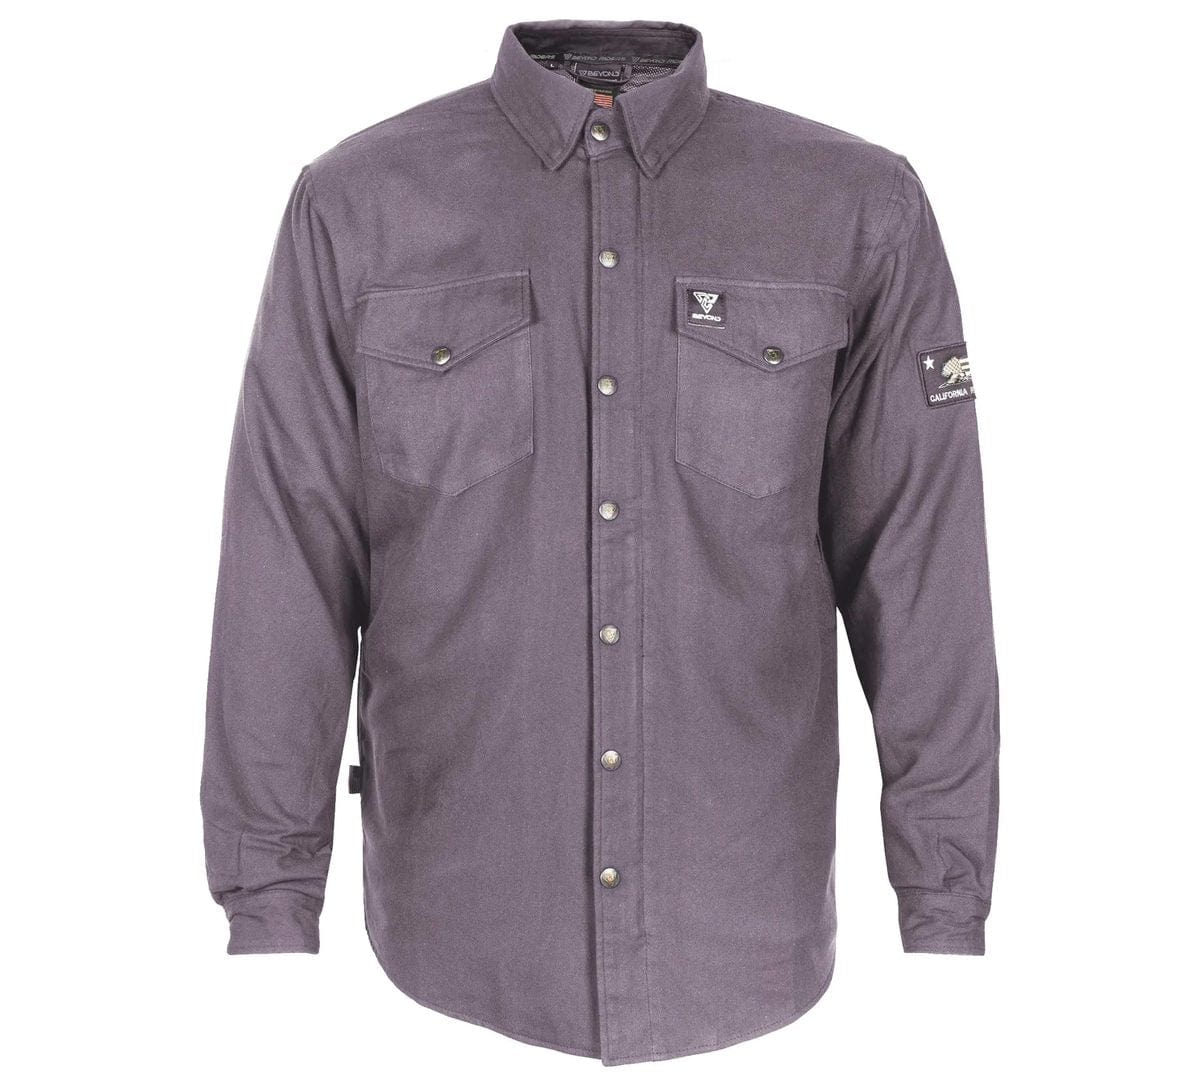 Protective Flannel Shirt - Grey Solid